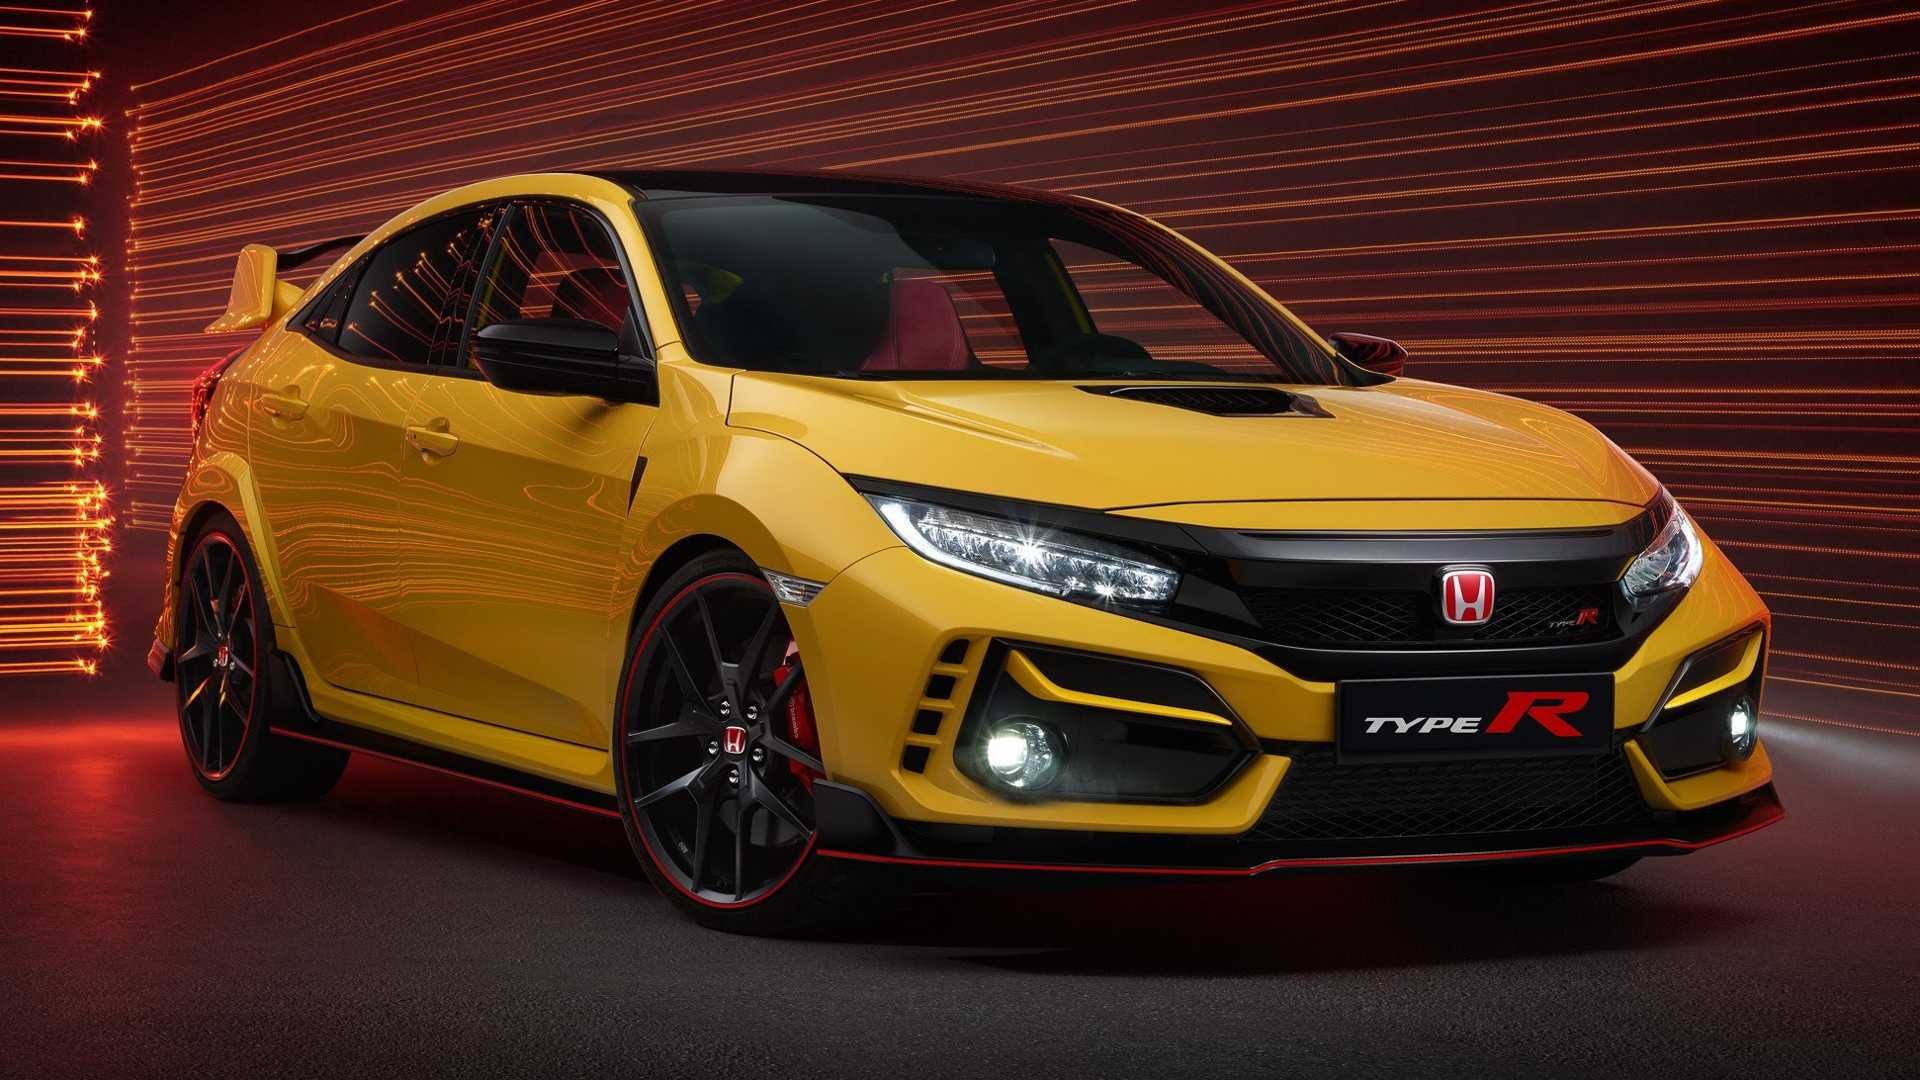 Honda Civic Type R goes hardcore with new Limited Edition